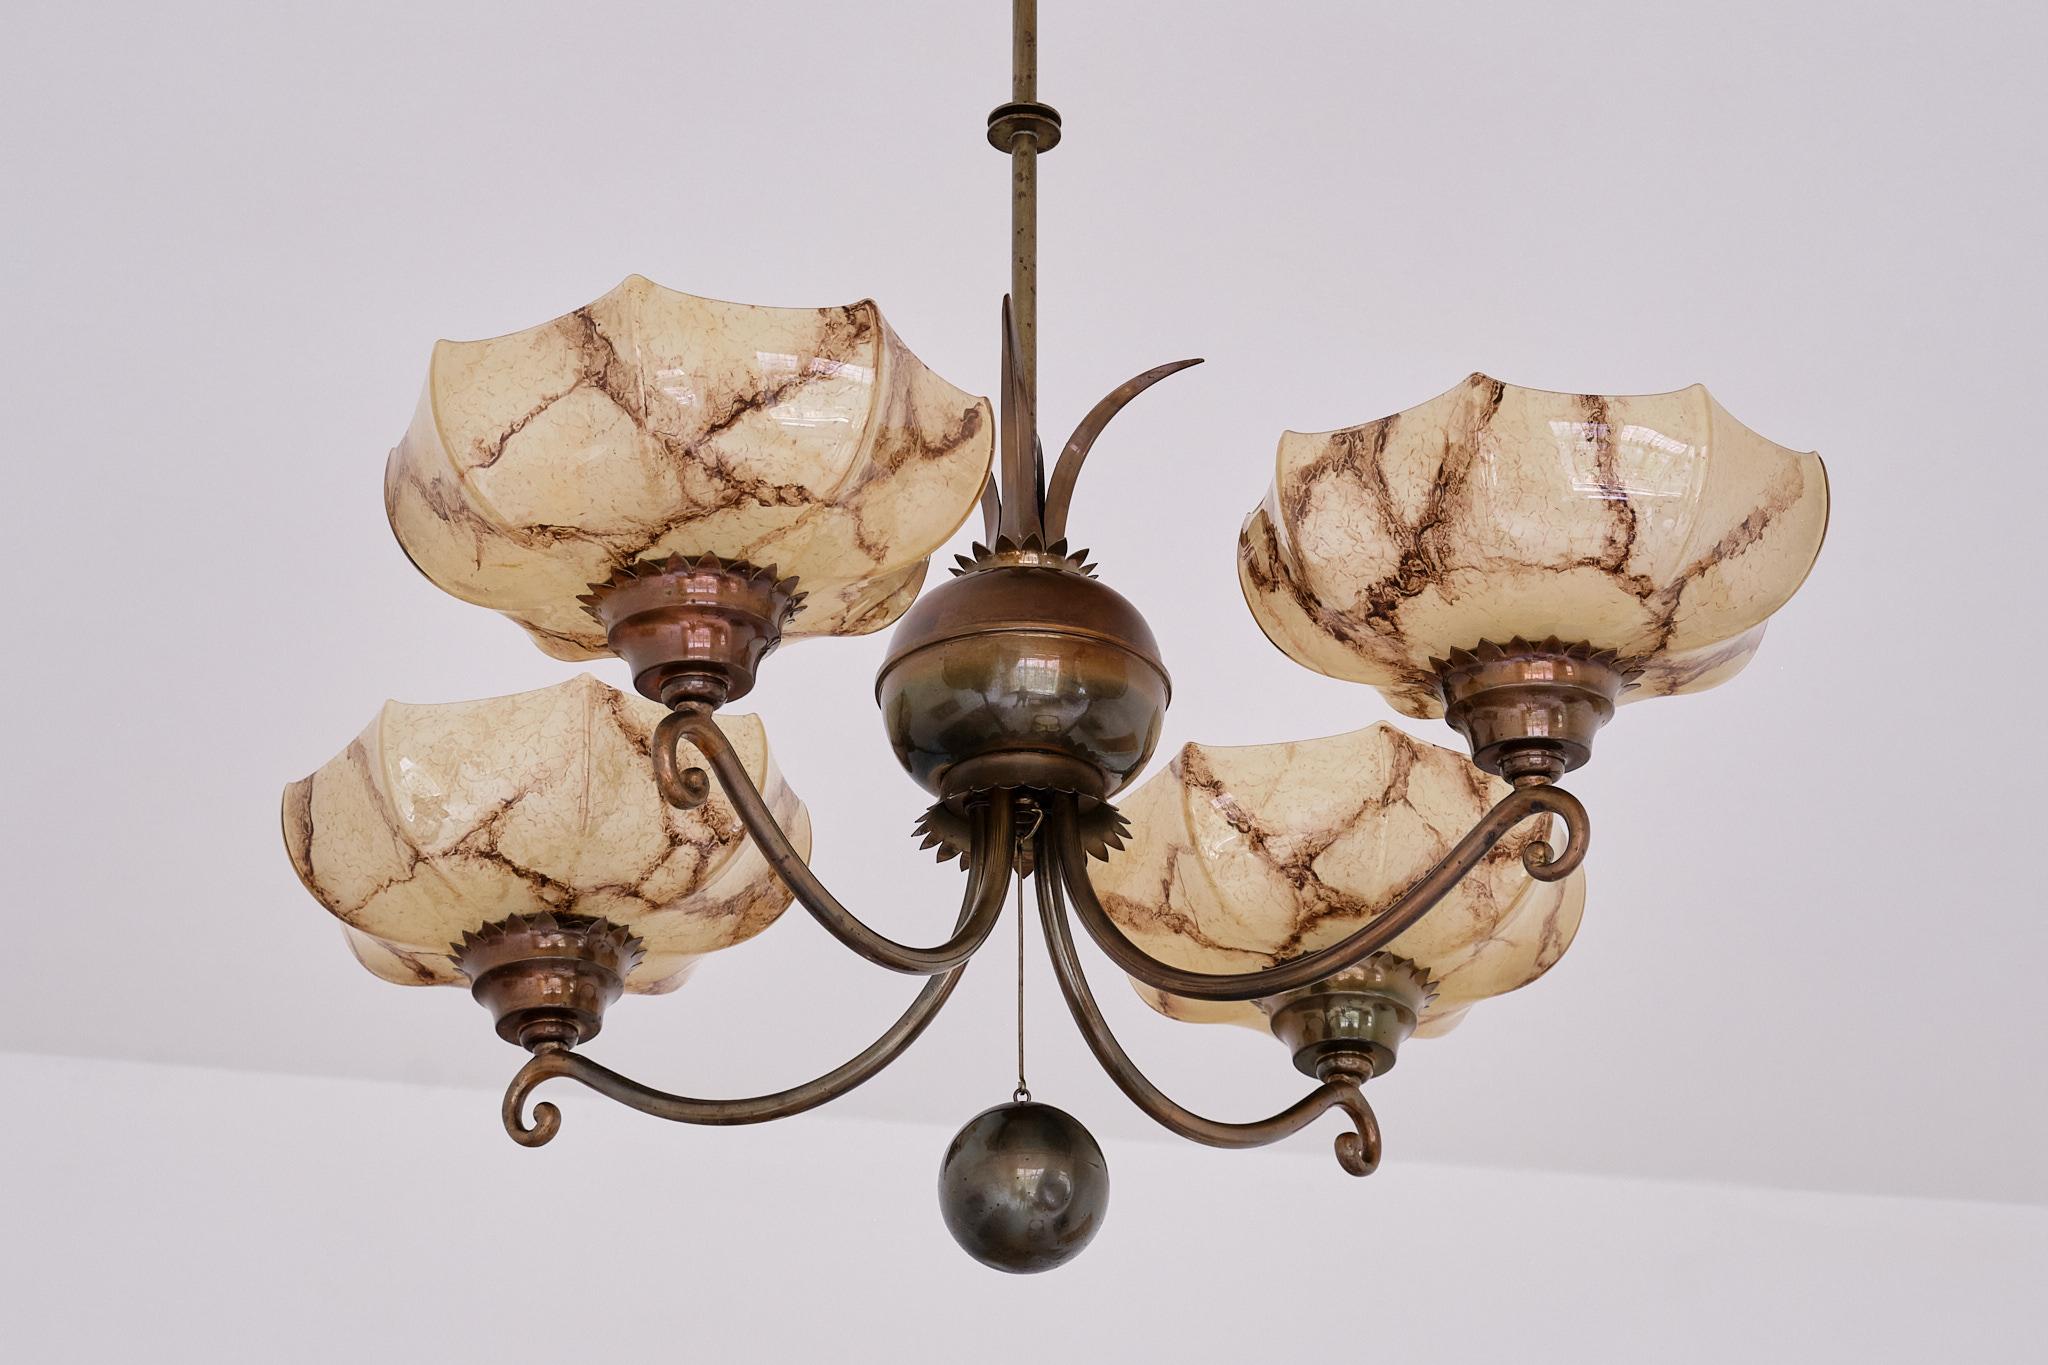 Swedish Harald Notini Chandelier in Brass and Marbled Glass, Böhlmarks, Sweden, 1927 For Sale